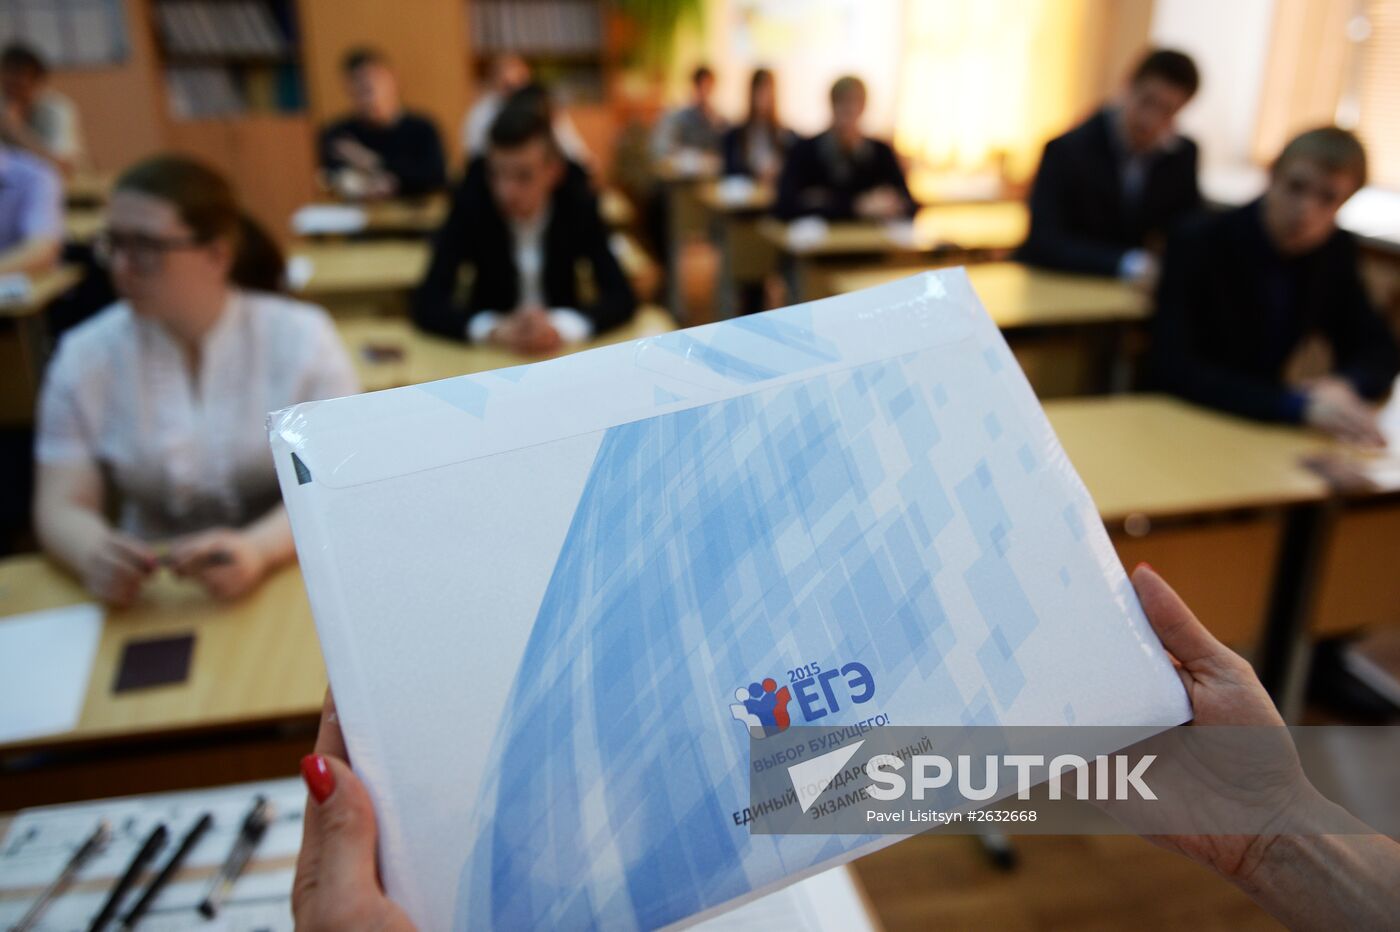 Unified State Exam in Russian language held in Russia